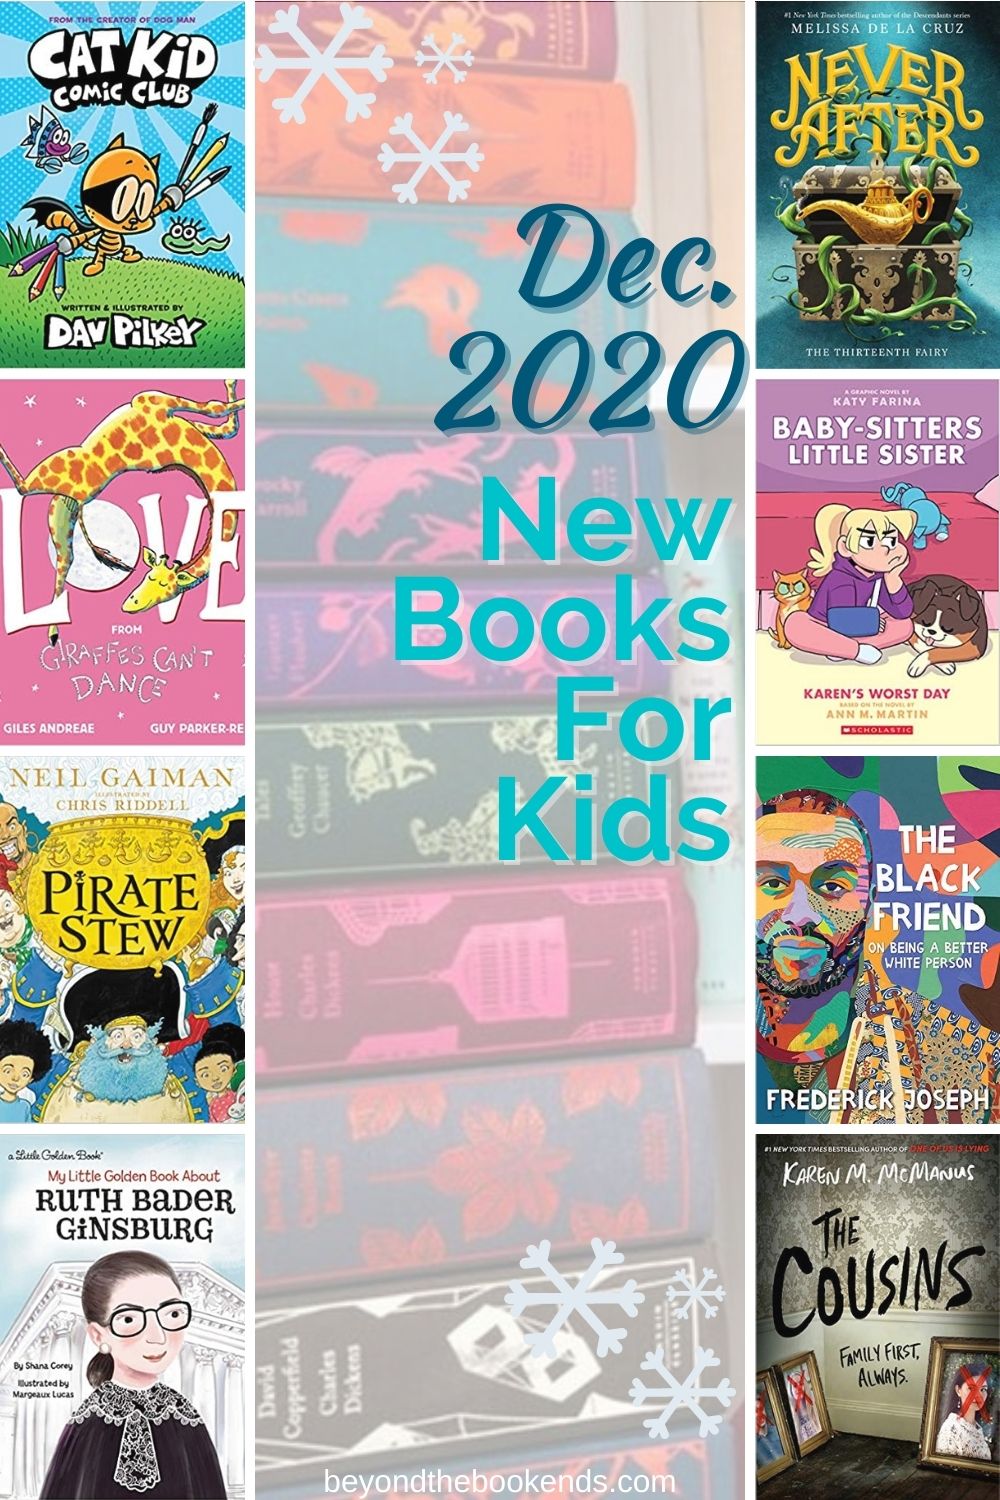 Must reads for kids coming Dec 2020. These new kids books are perfect to give this holiday season.